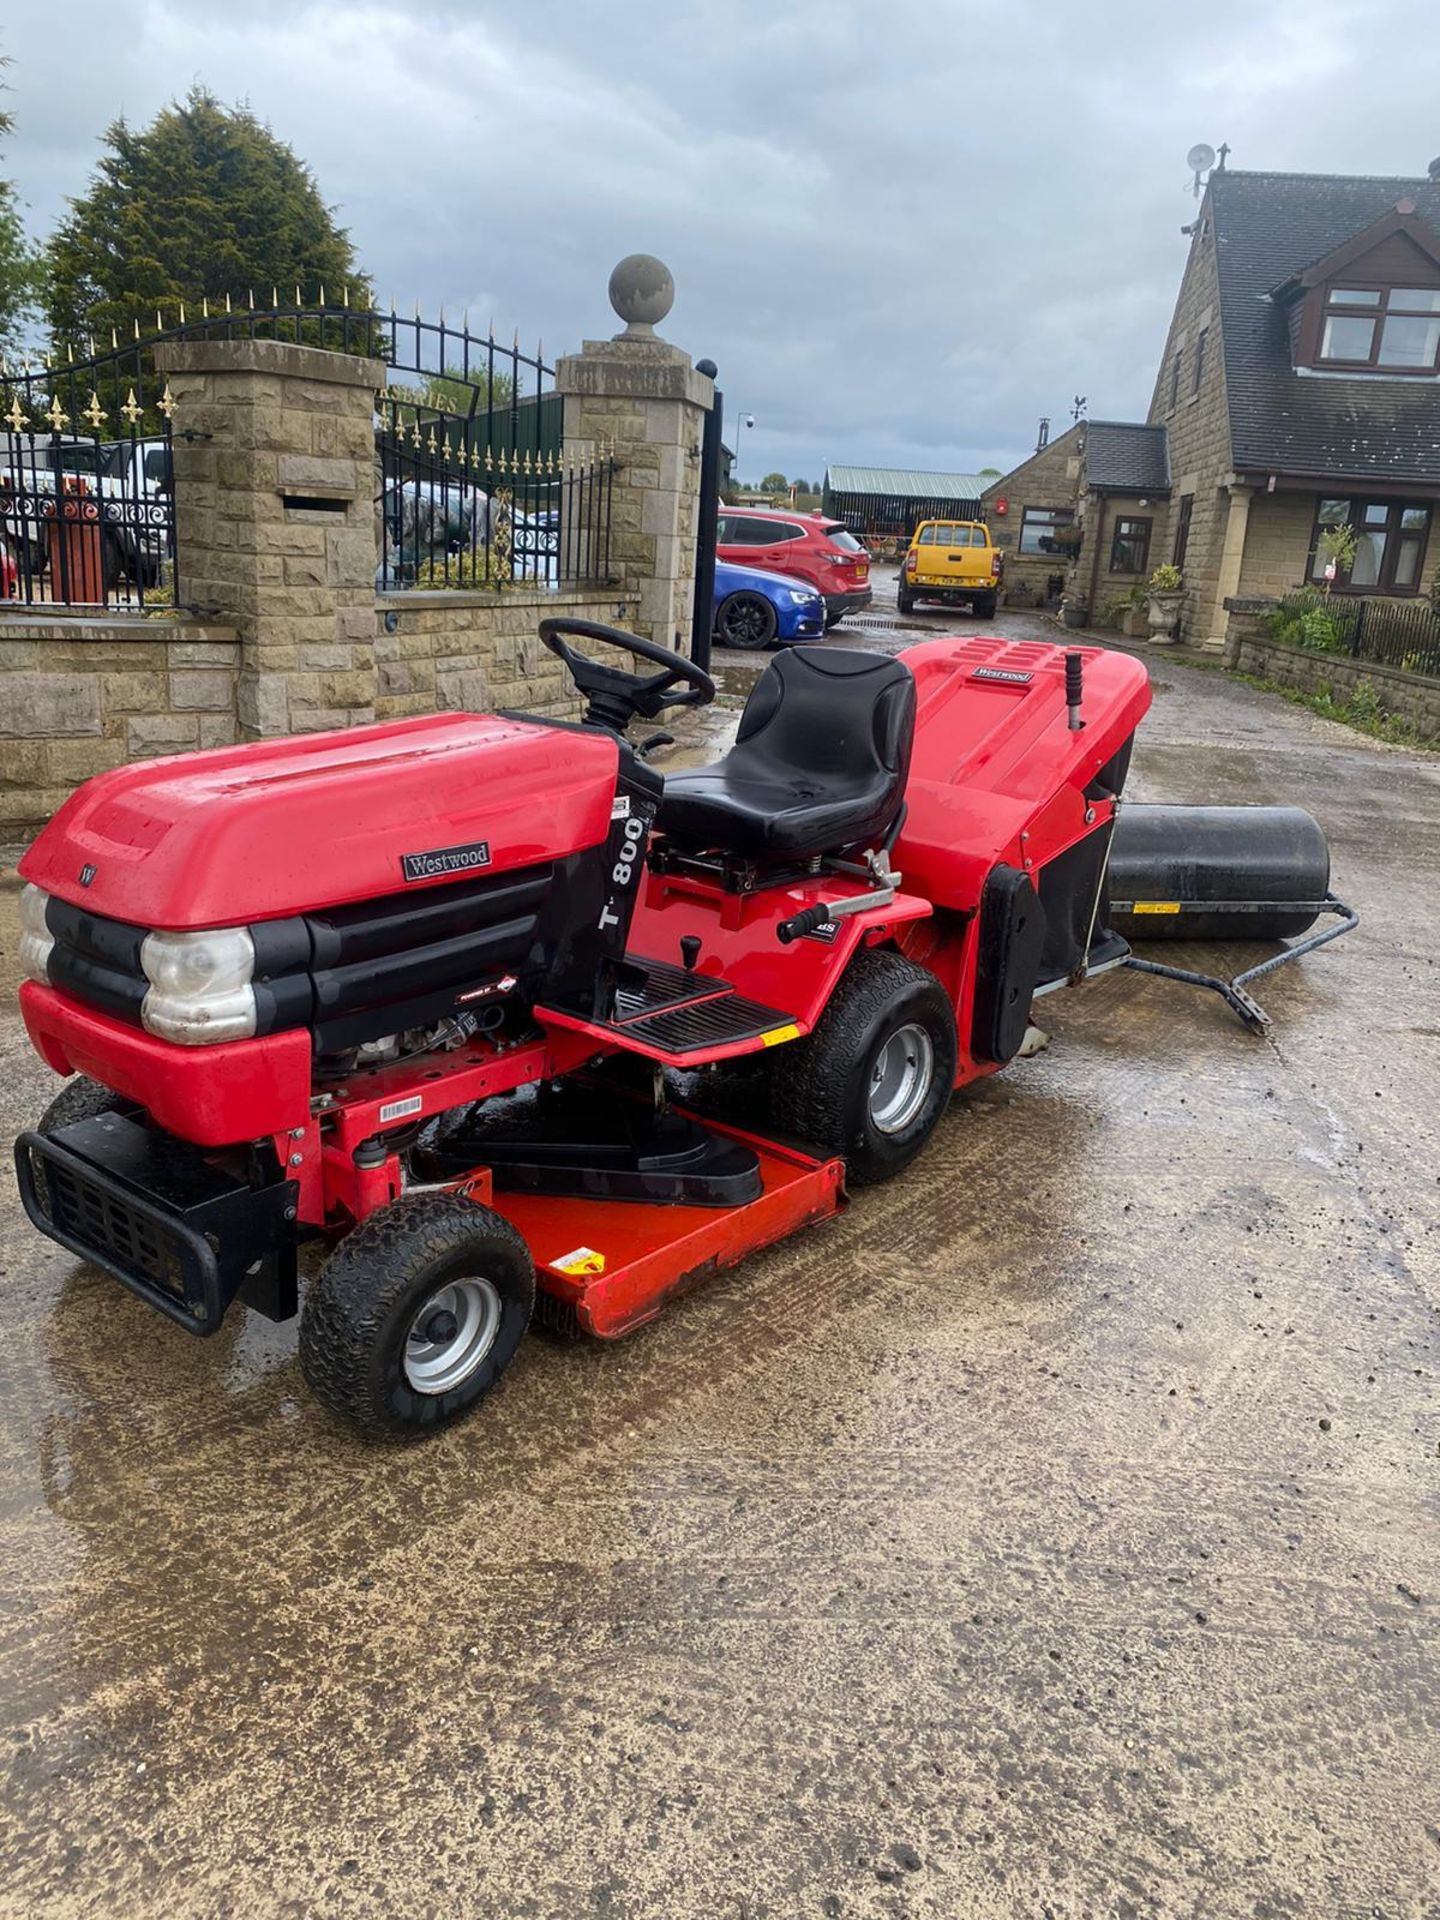 WESTWOOD T1800 RIDE ON MOWER WITH ROLLER, RUNS DRIVES AND CUTS, HYDROSTATIC *NO VAT* - Image 2 of 7